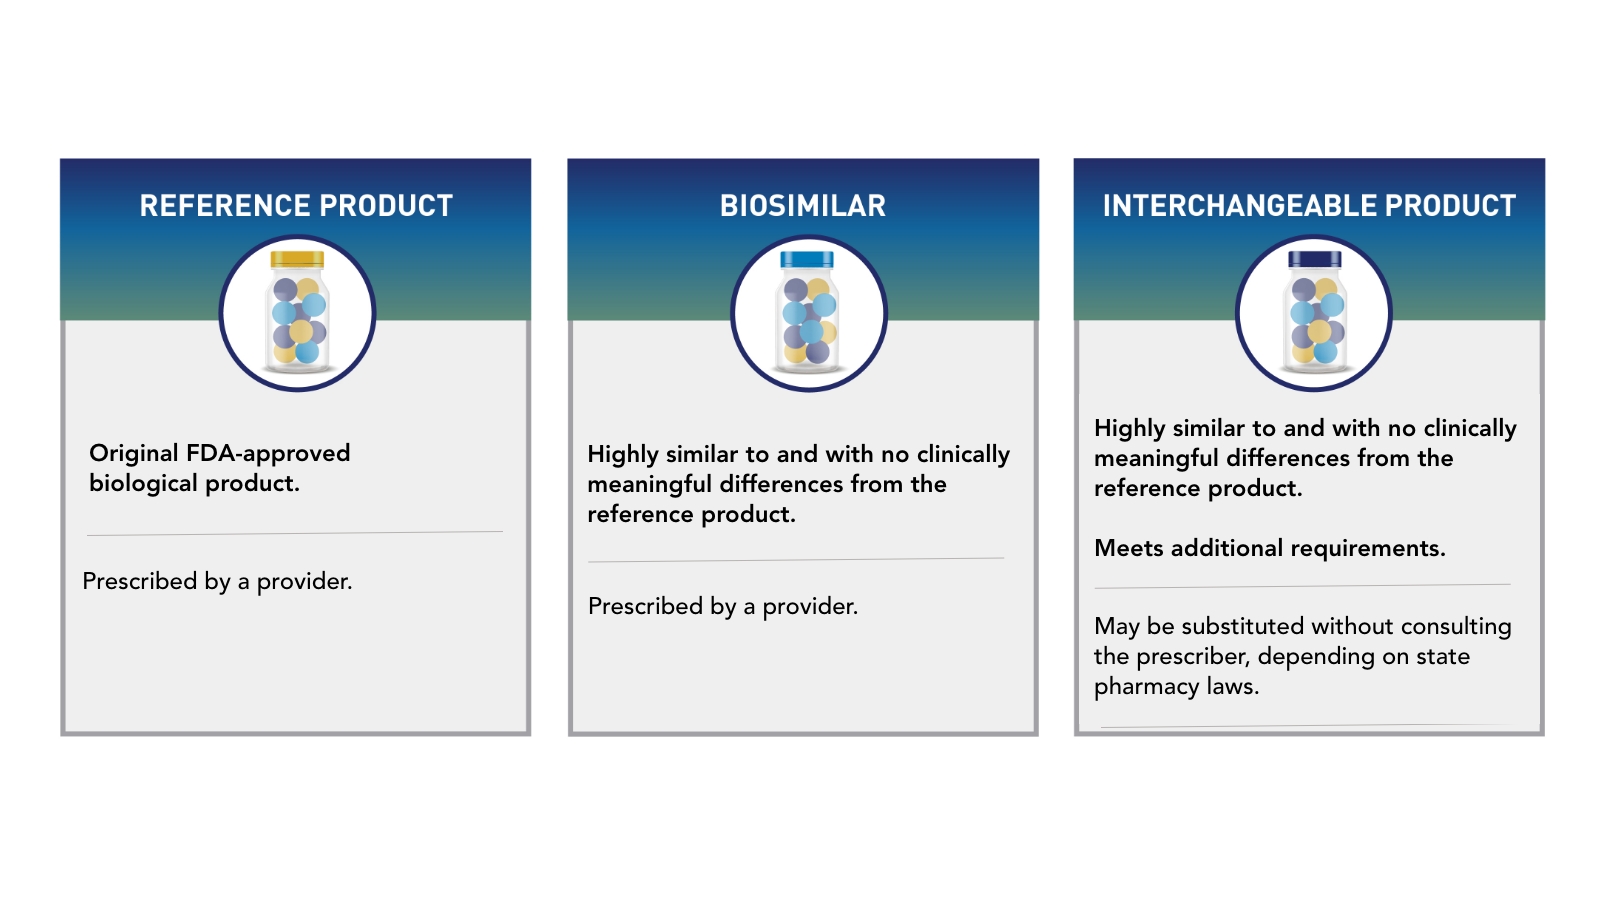 A comparison of reference products, biosimilars, and interchangeable products. A reference product is an FDA-approved biological product that is approved based on, among other things, a full complement of safety and efficacy data. A biosimilar is a biological product that is highly similar to the reference product and has no clinically meaningful differences from the reference product in terms of safety, purity, and potency. An interchangeable biosimilar is a biosimilar that meets additional requirements an